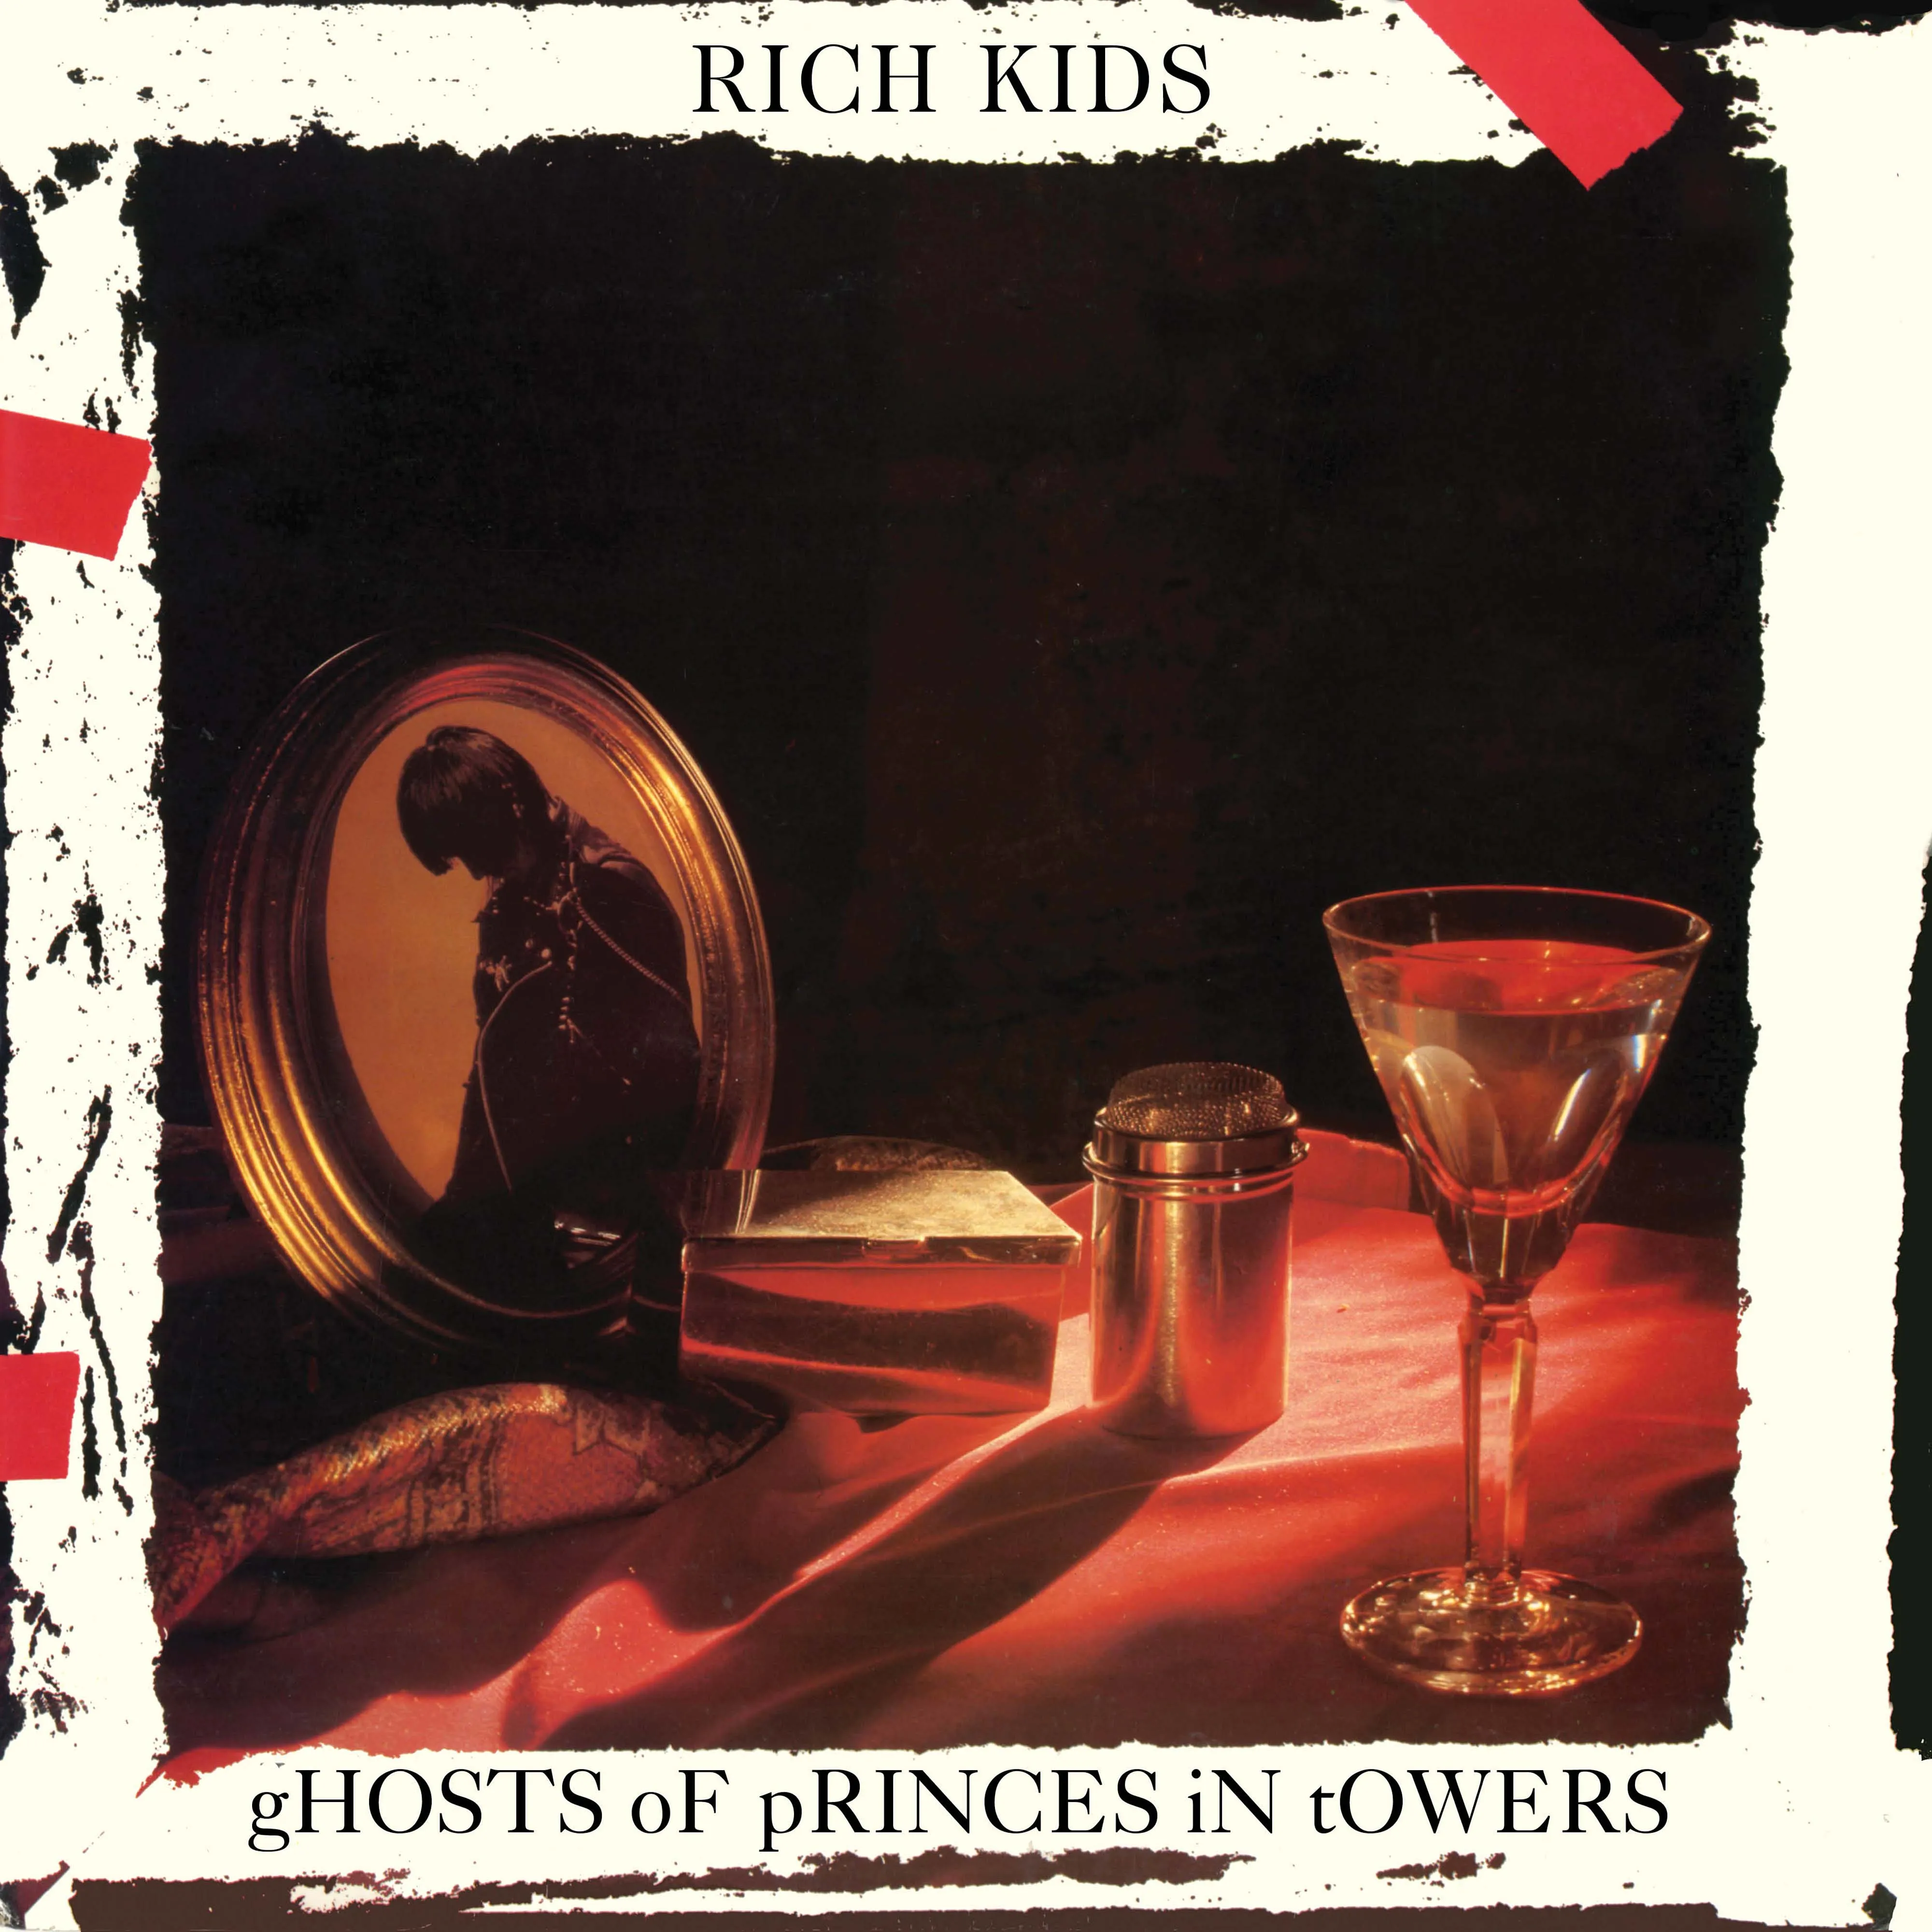 RICH KIDS / GHOSTS OF PRINCES IN TOWERS